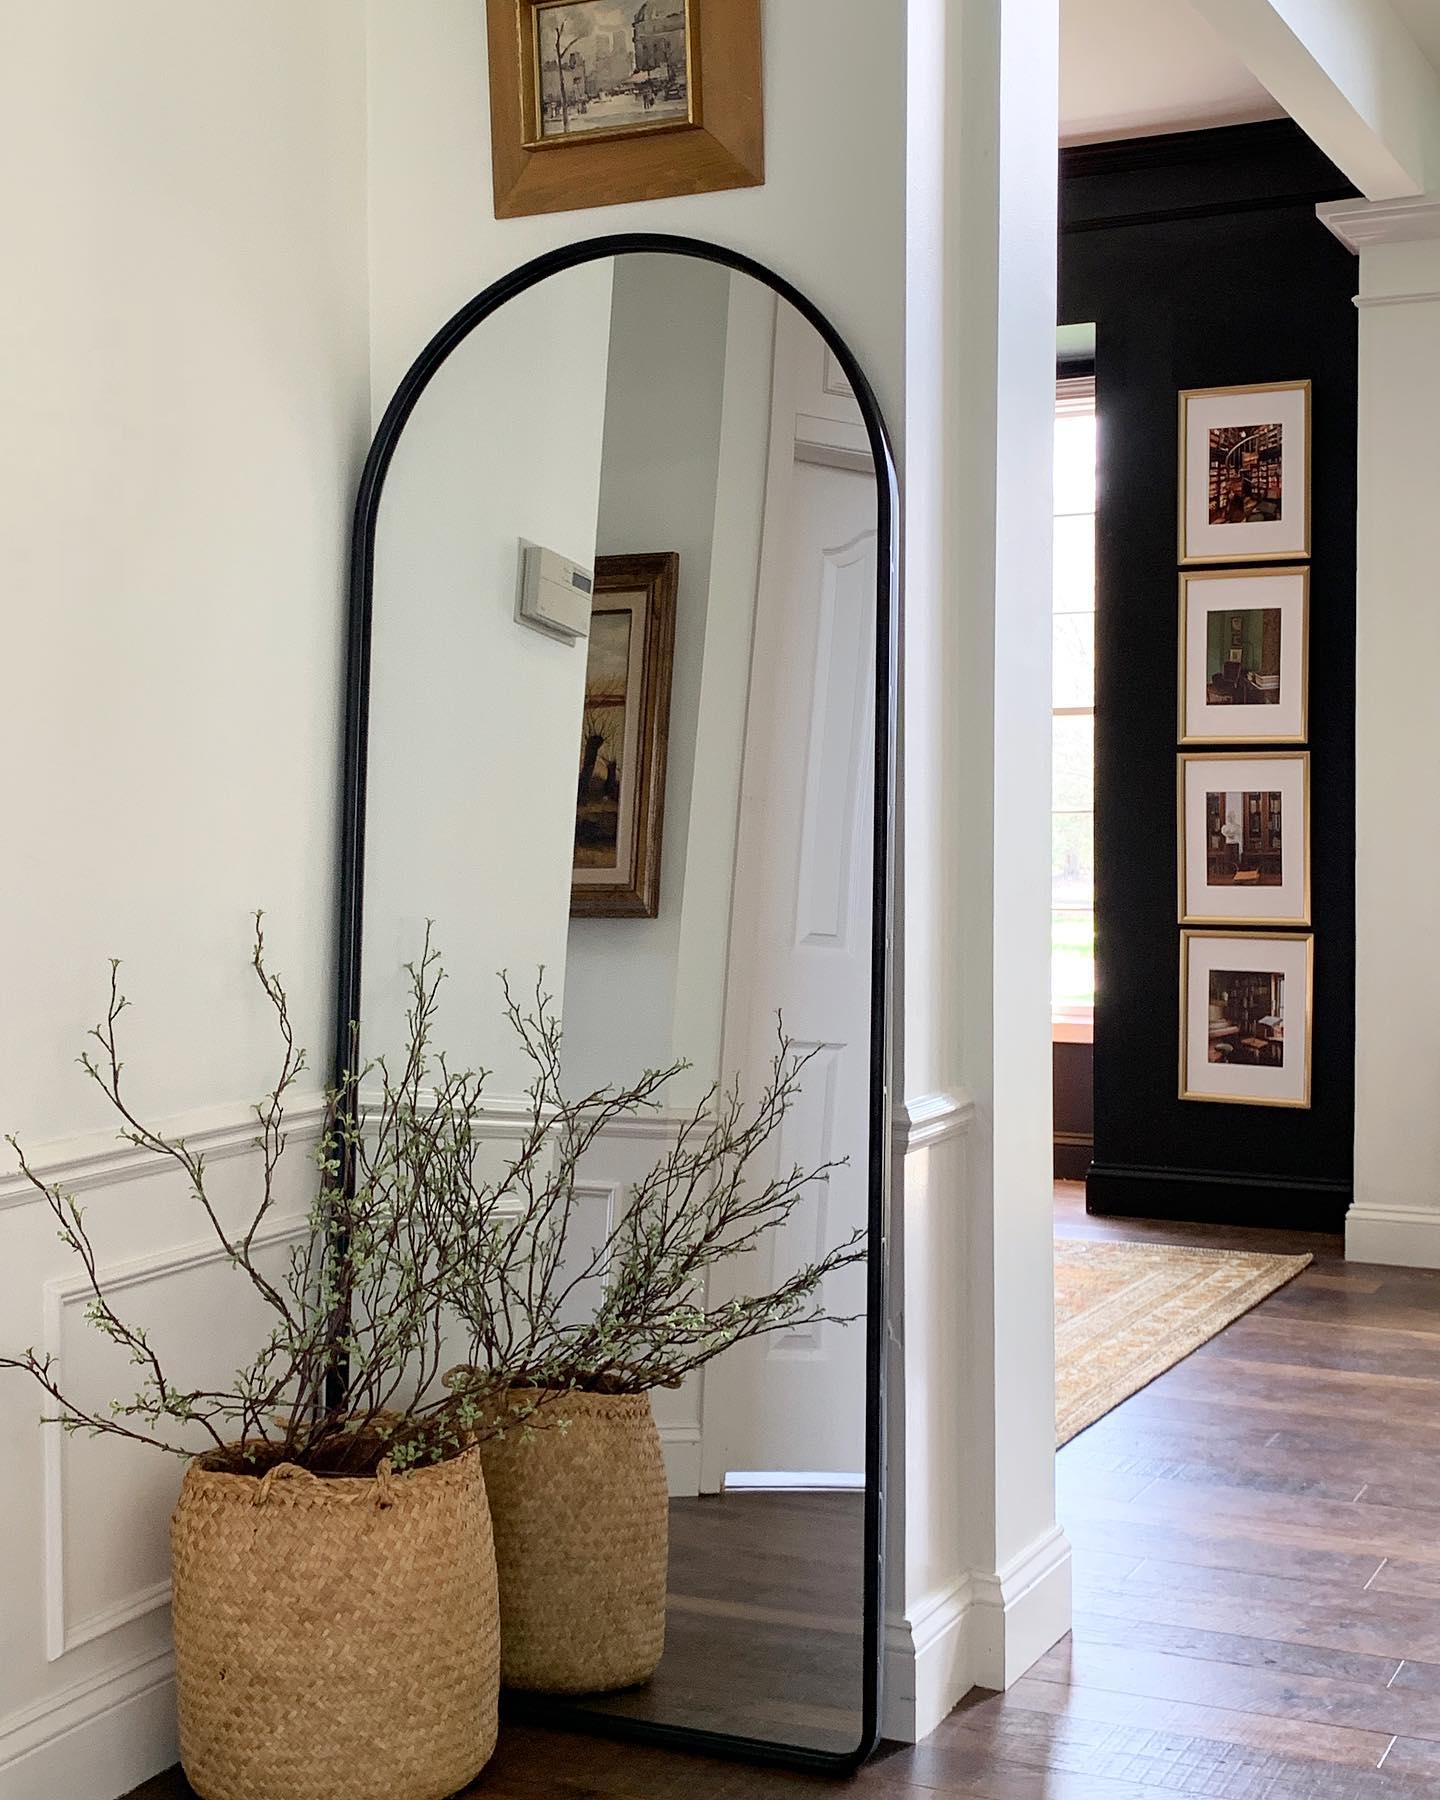 Refreshed a little corner in our entry with new pieces from @allmodern! Love the scale of this arched mirror, and the basket actually comes as a set of two. Iâ€™m using the larger one in our family room to store blankets, and here, the smaller one is perfect for some stems.ðŸ‘�ðŸ�¼ Take advantage of their fast and free shipping! Learn more sbout @allmodernâ€™s product via the @shop.ltk app. Iâ€™ve linked these items hereâž¡ï¸� https://liketk.it/3FqbK #ad #allmodernpartner #summerwithallmodern #liketkit